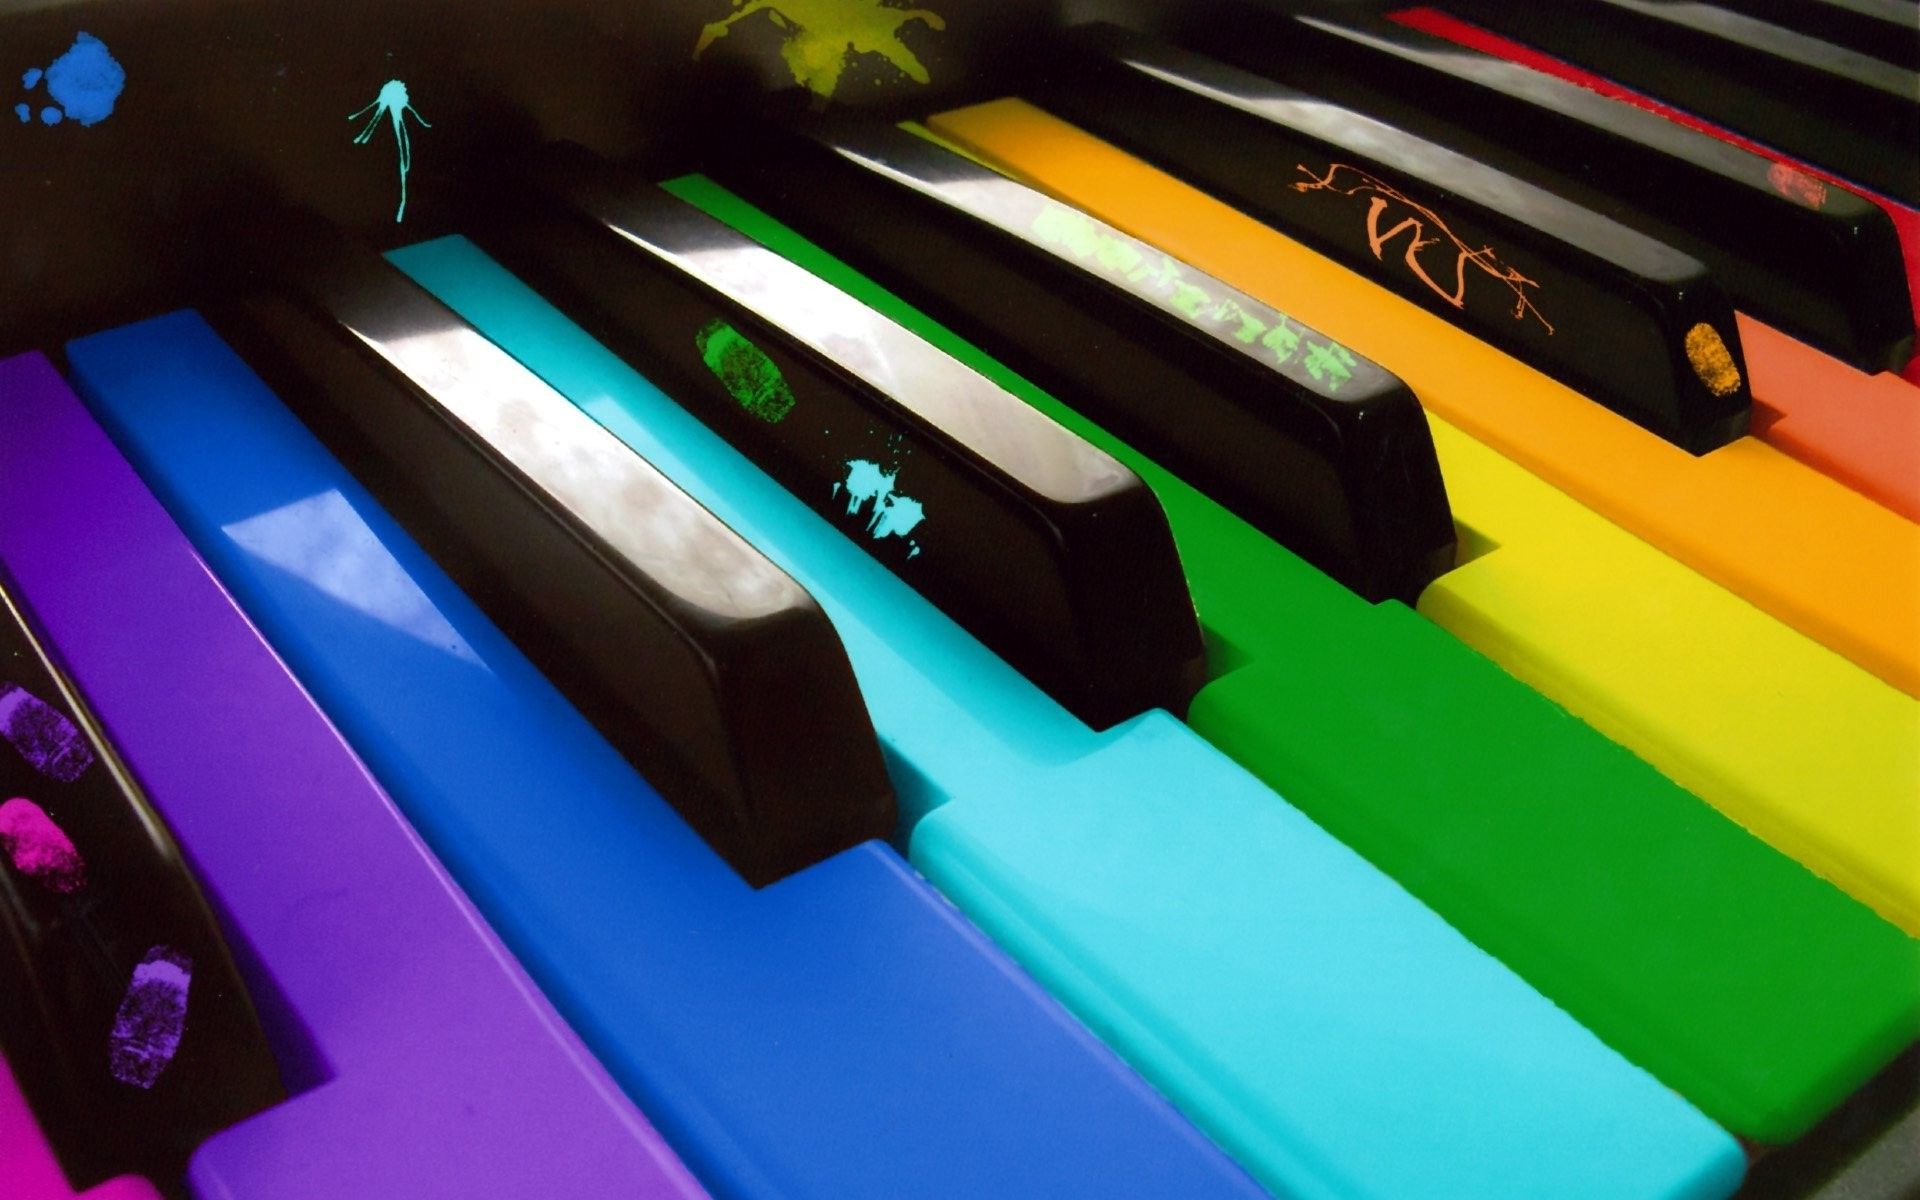 colorful piano backgrounds